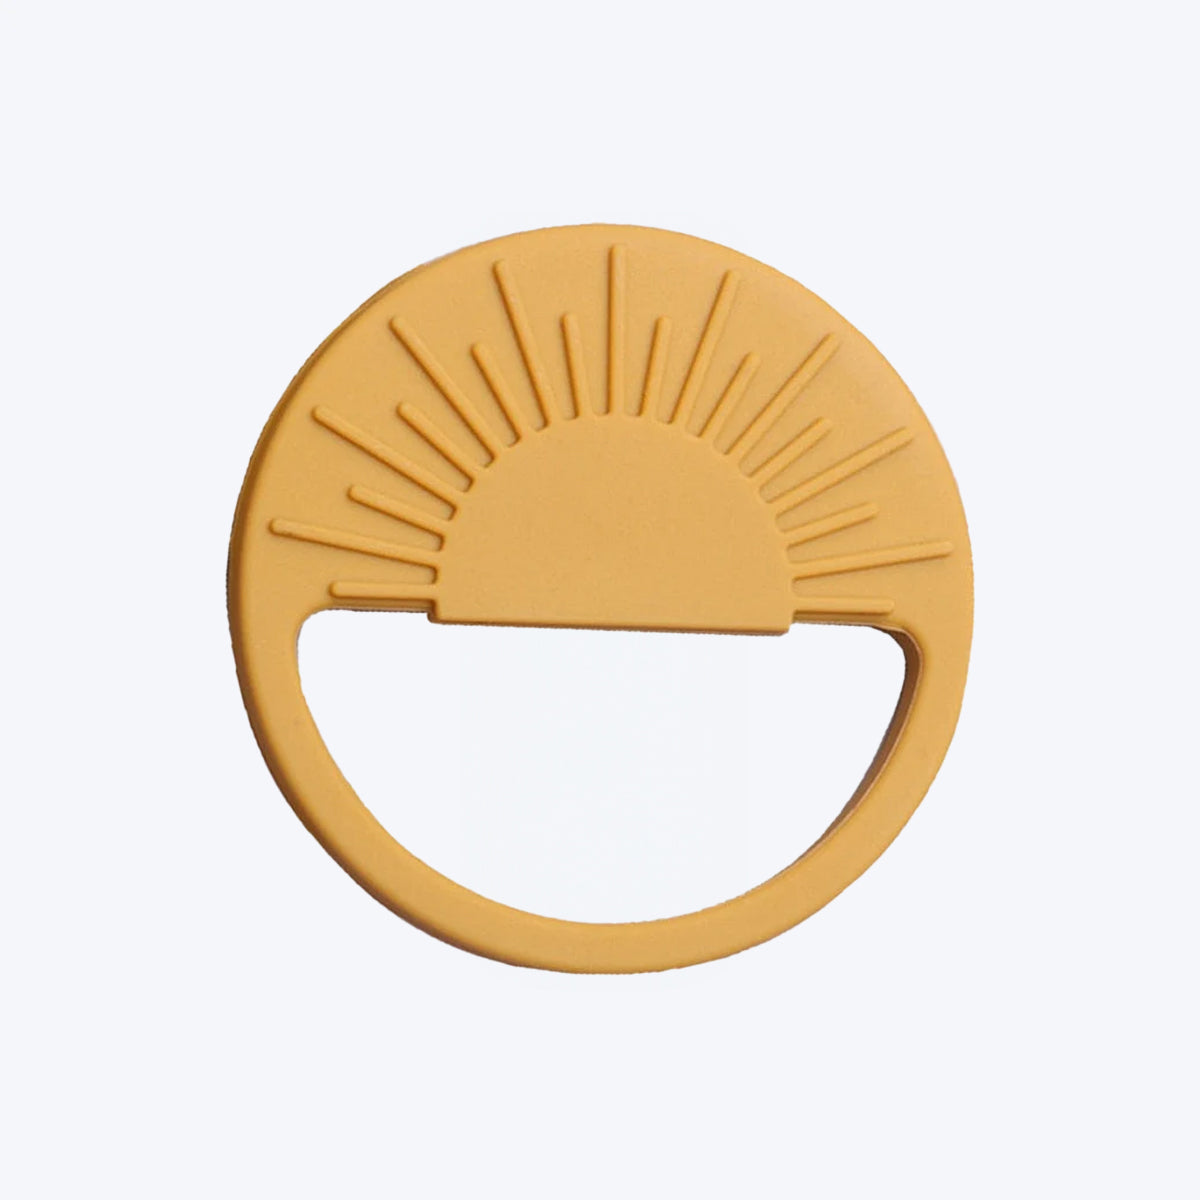 A yellow silicone teething ring in the shape of a sunburst